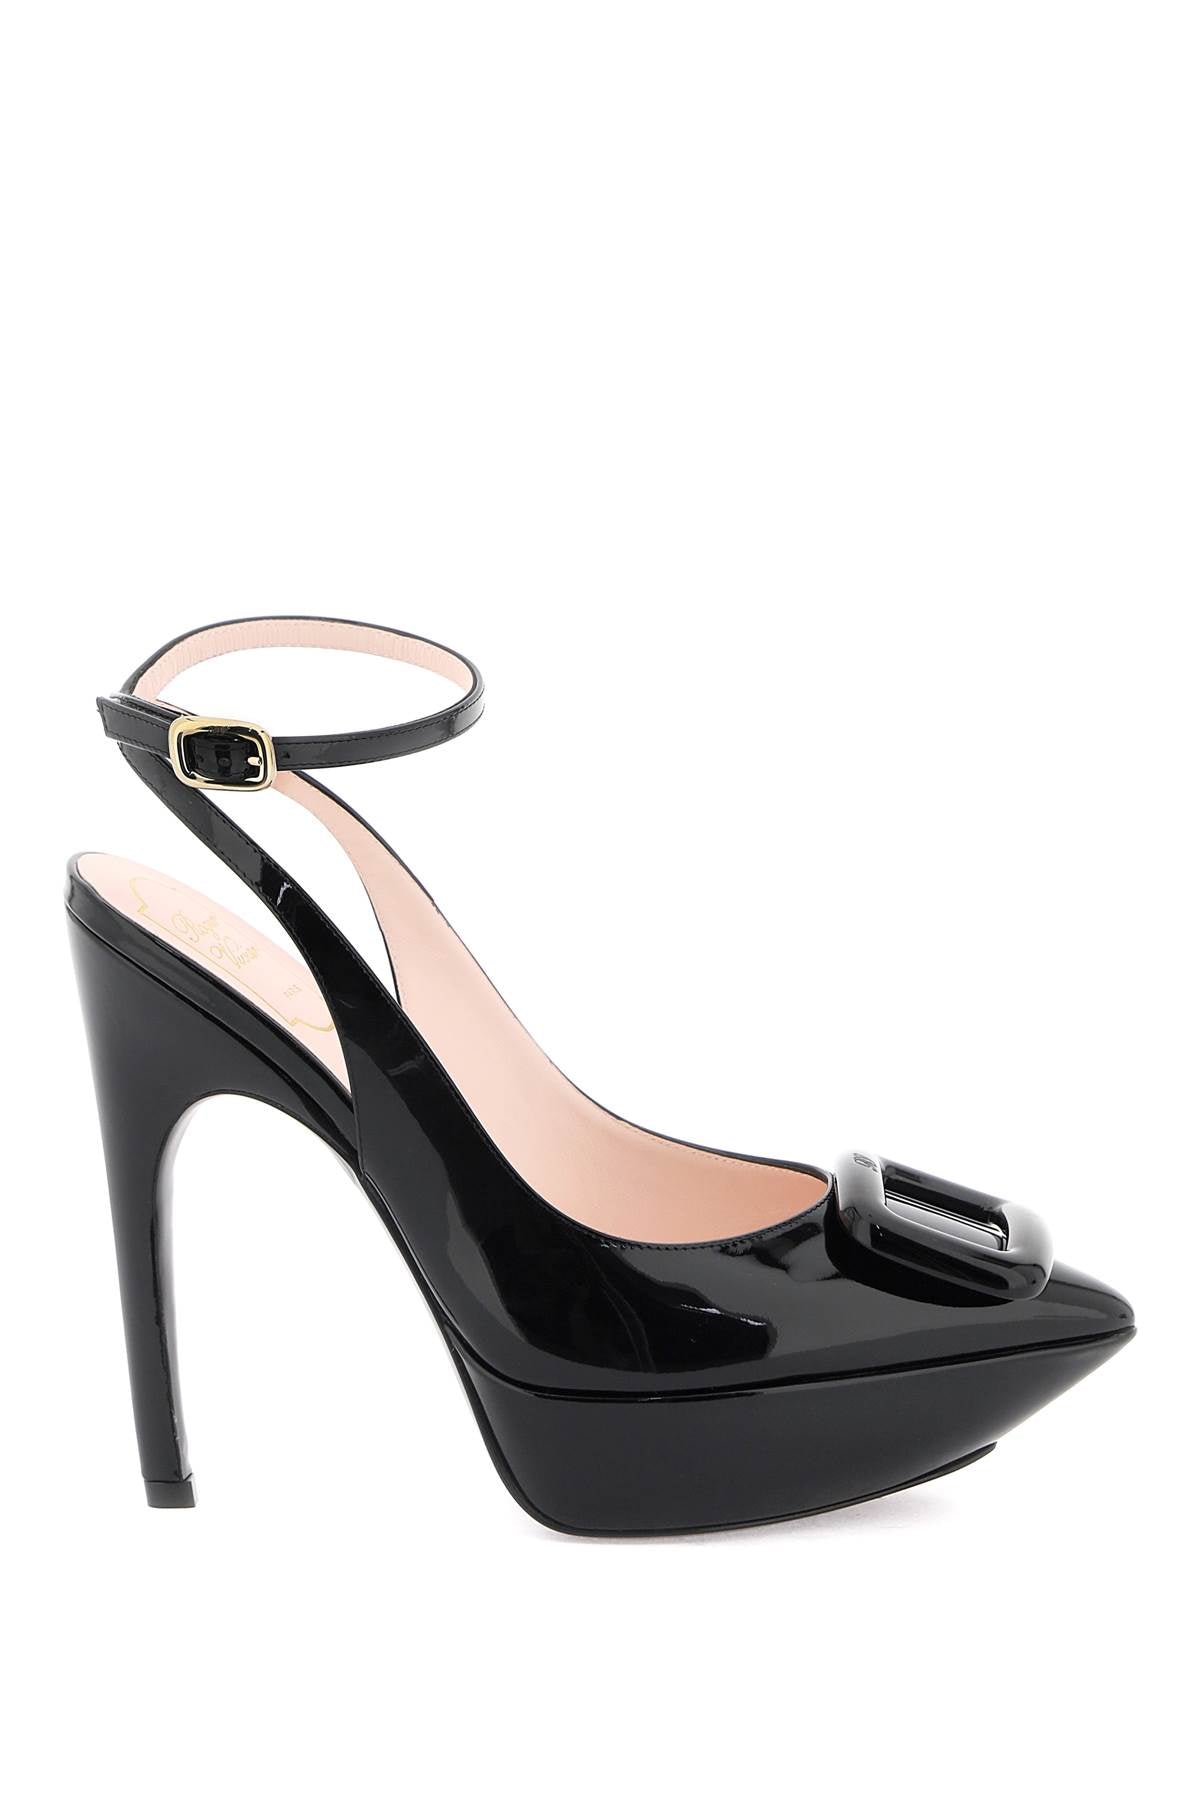 Black Patent Leather Pointed Pumps with Adjustable Ankle Strap